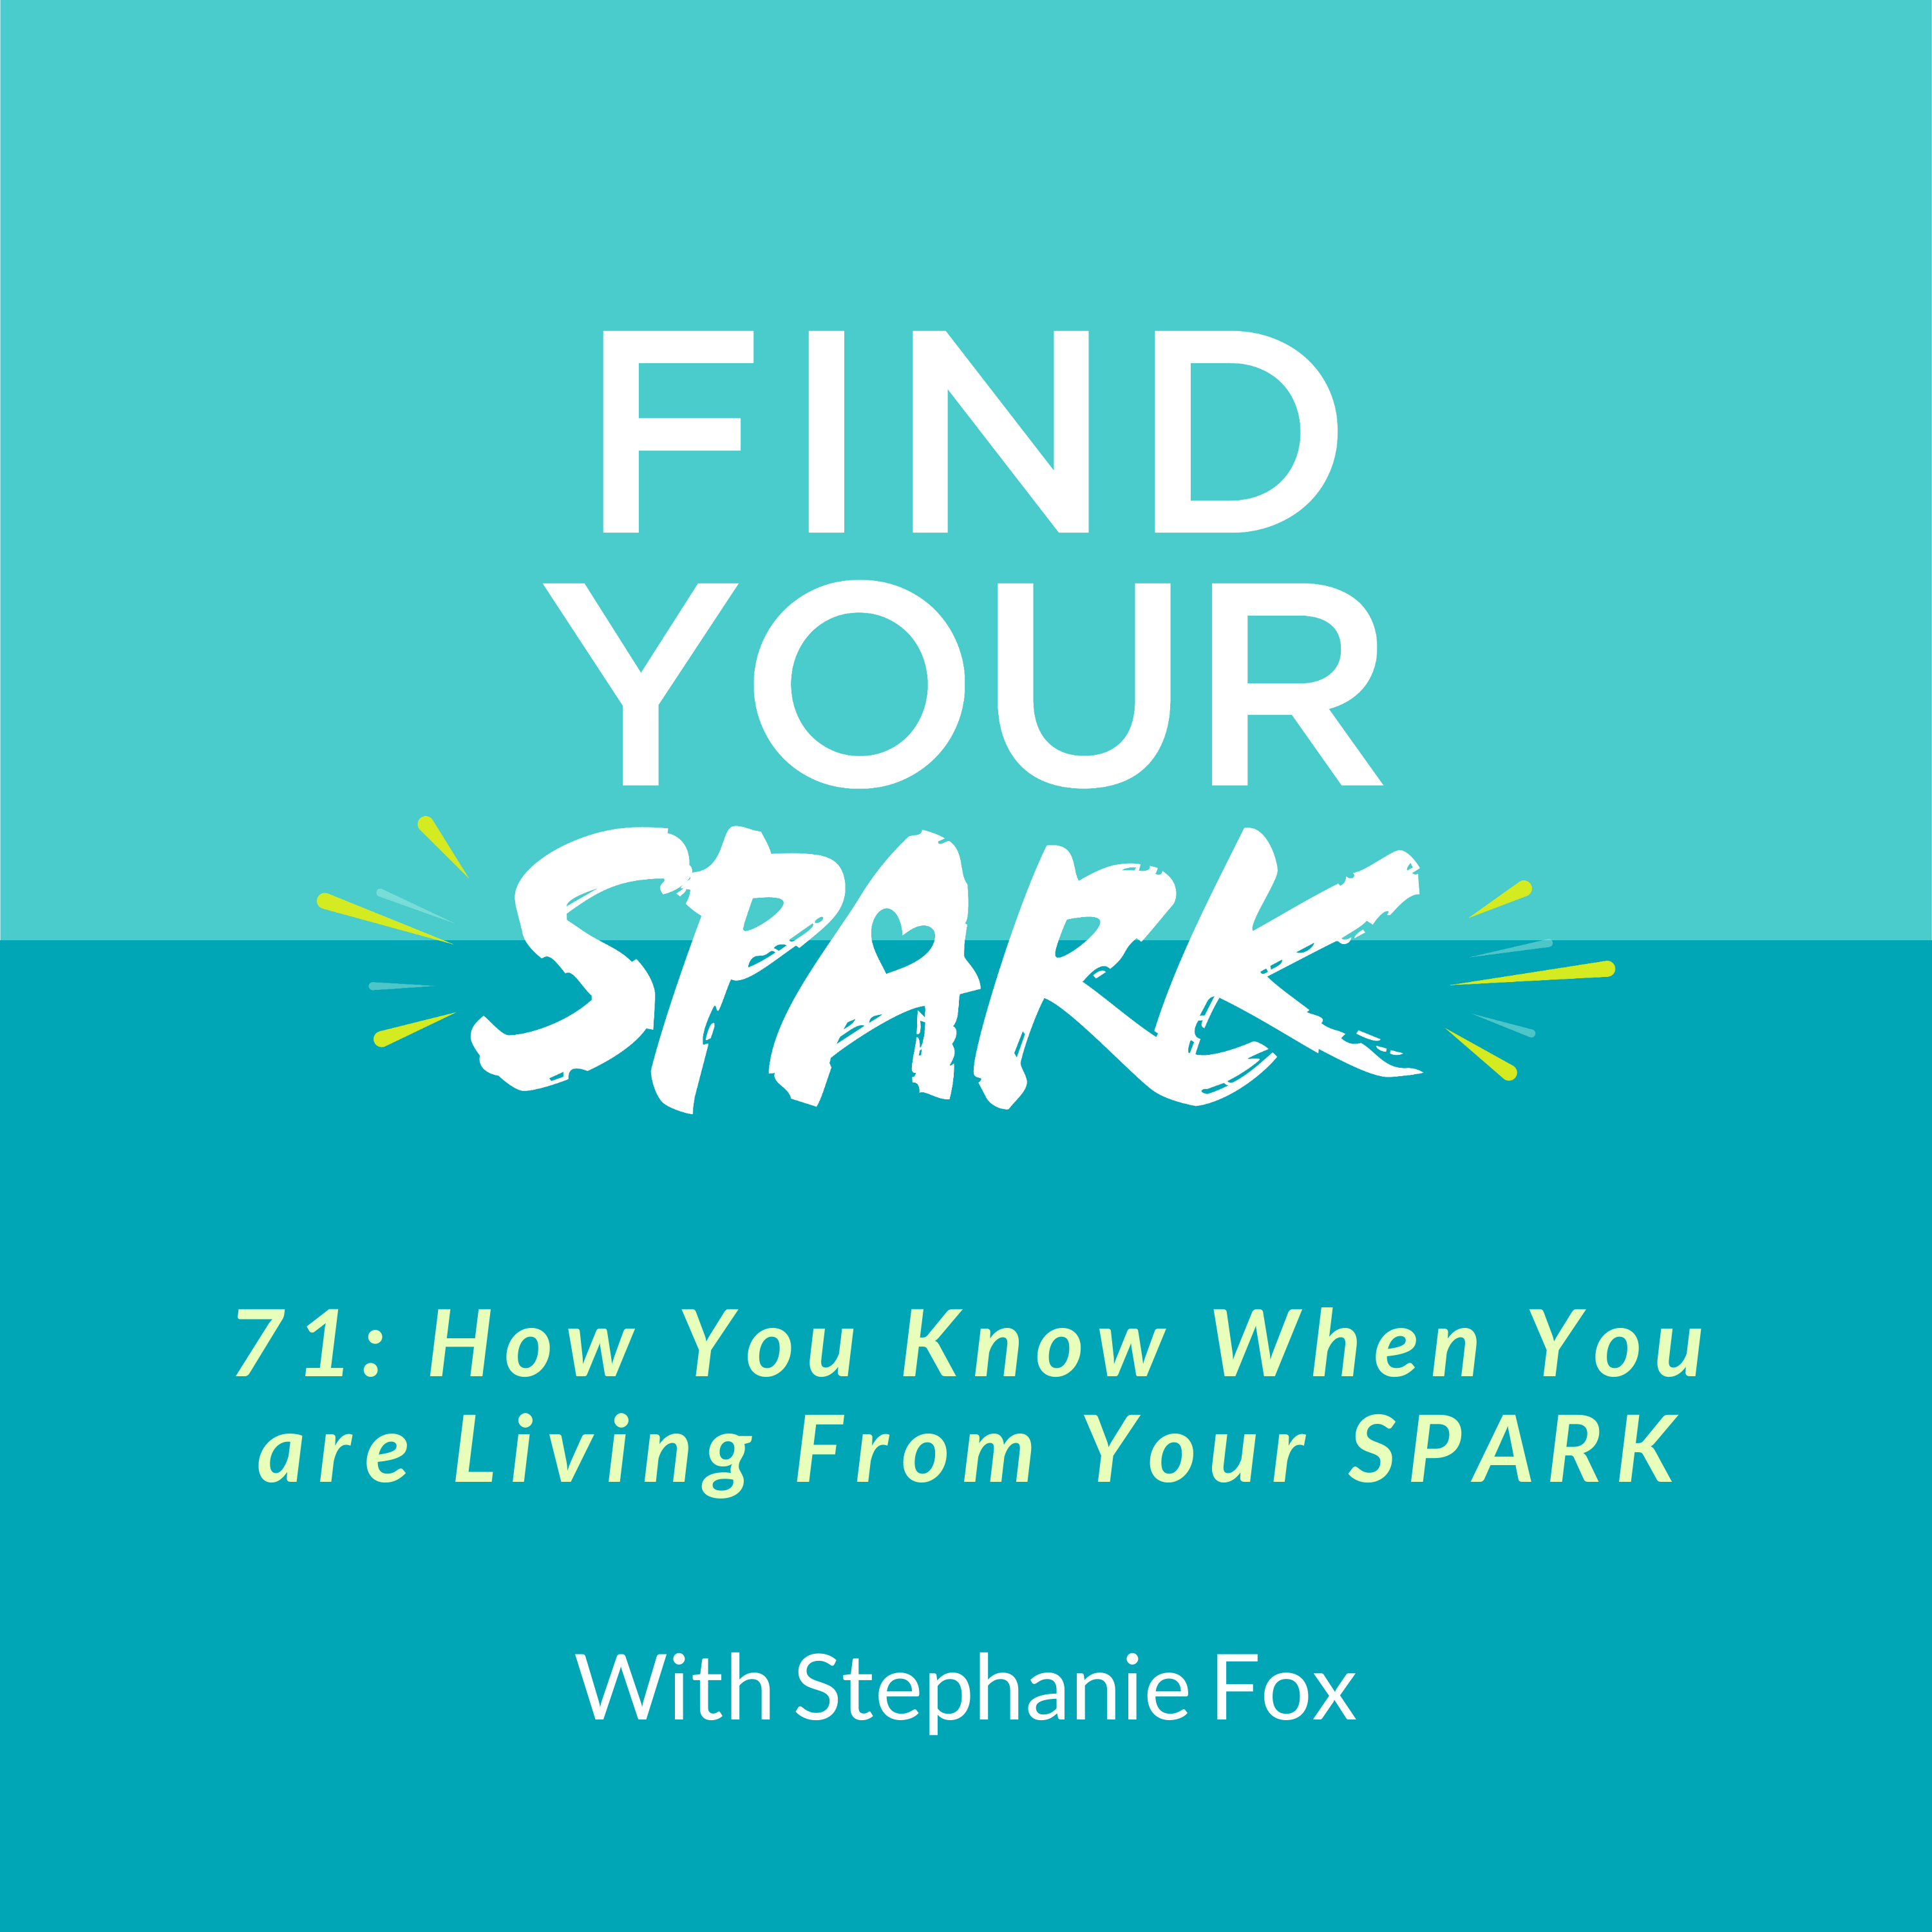 71: How You Know When You are Living From Your Spark